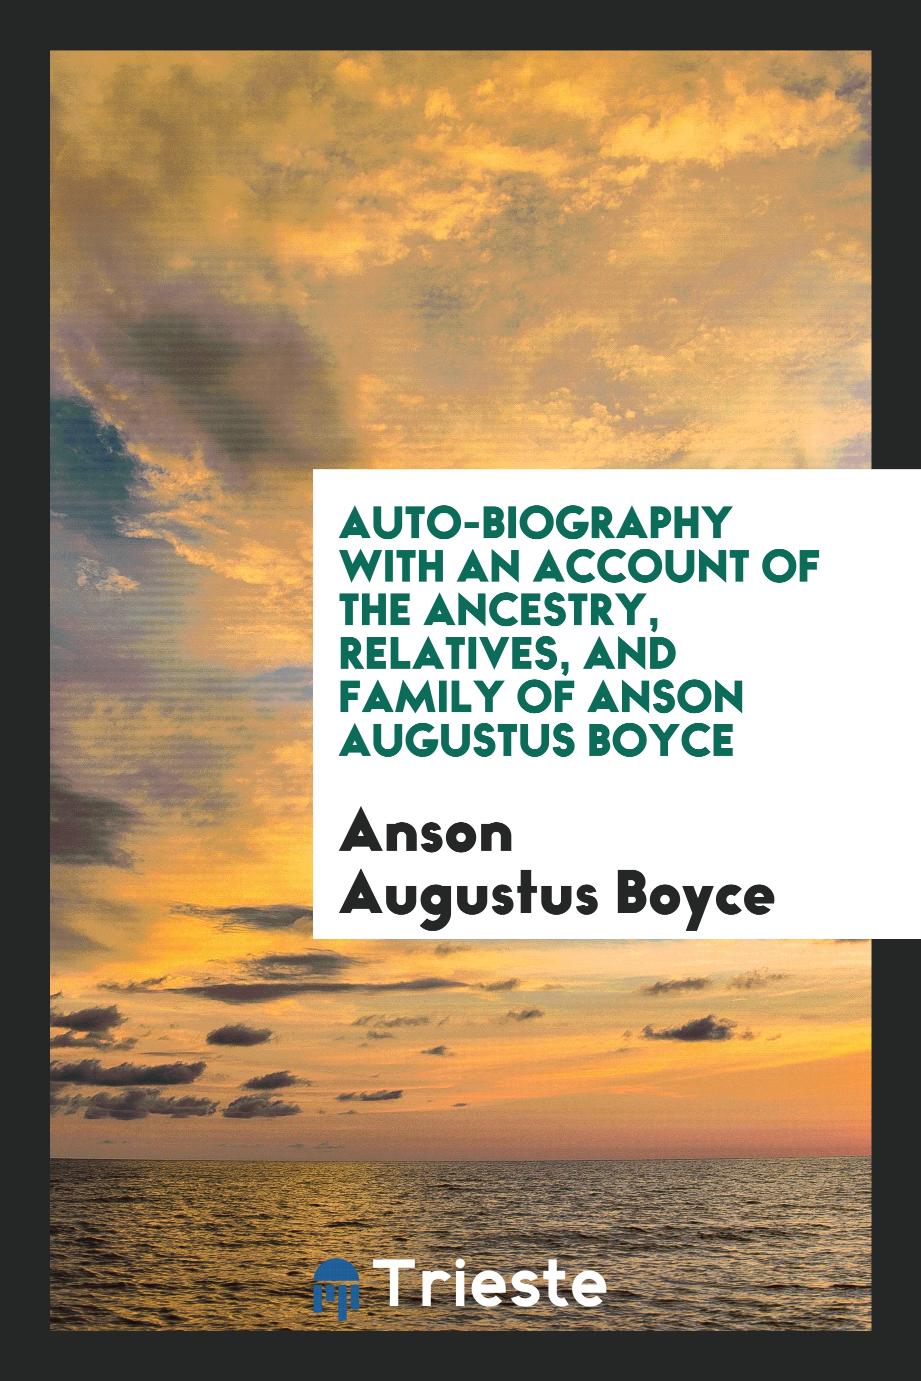 Auto-biography with an account of the ancestry, relatives, and family of Anson Augustus Boyce